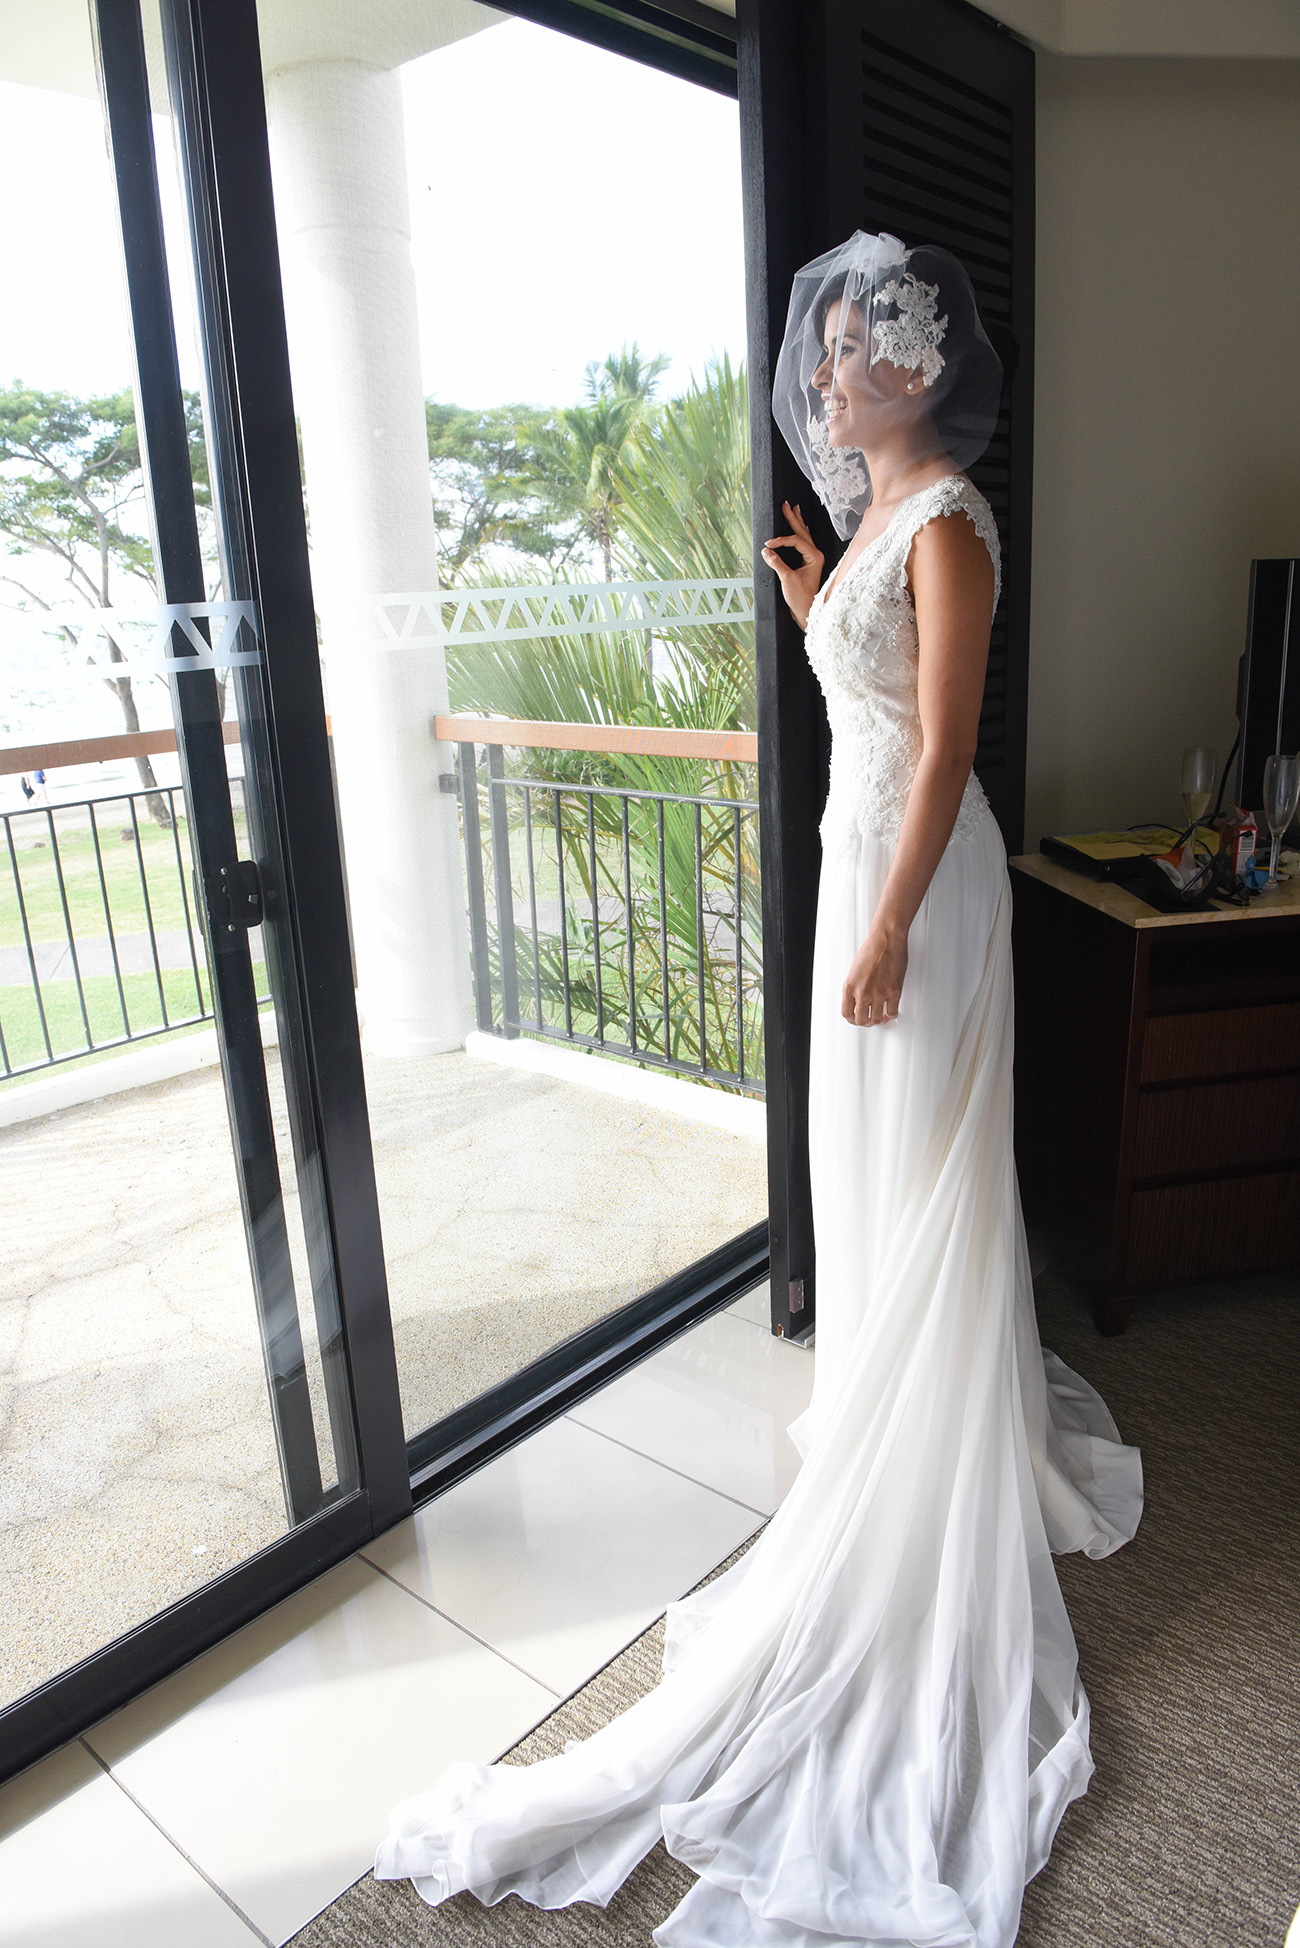 In front of the window Bride smiling in her beautiful wedding dress and her veil